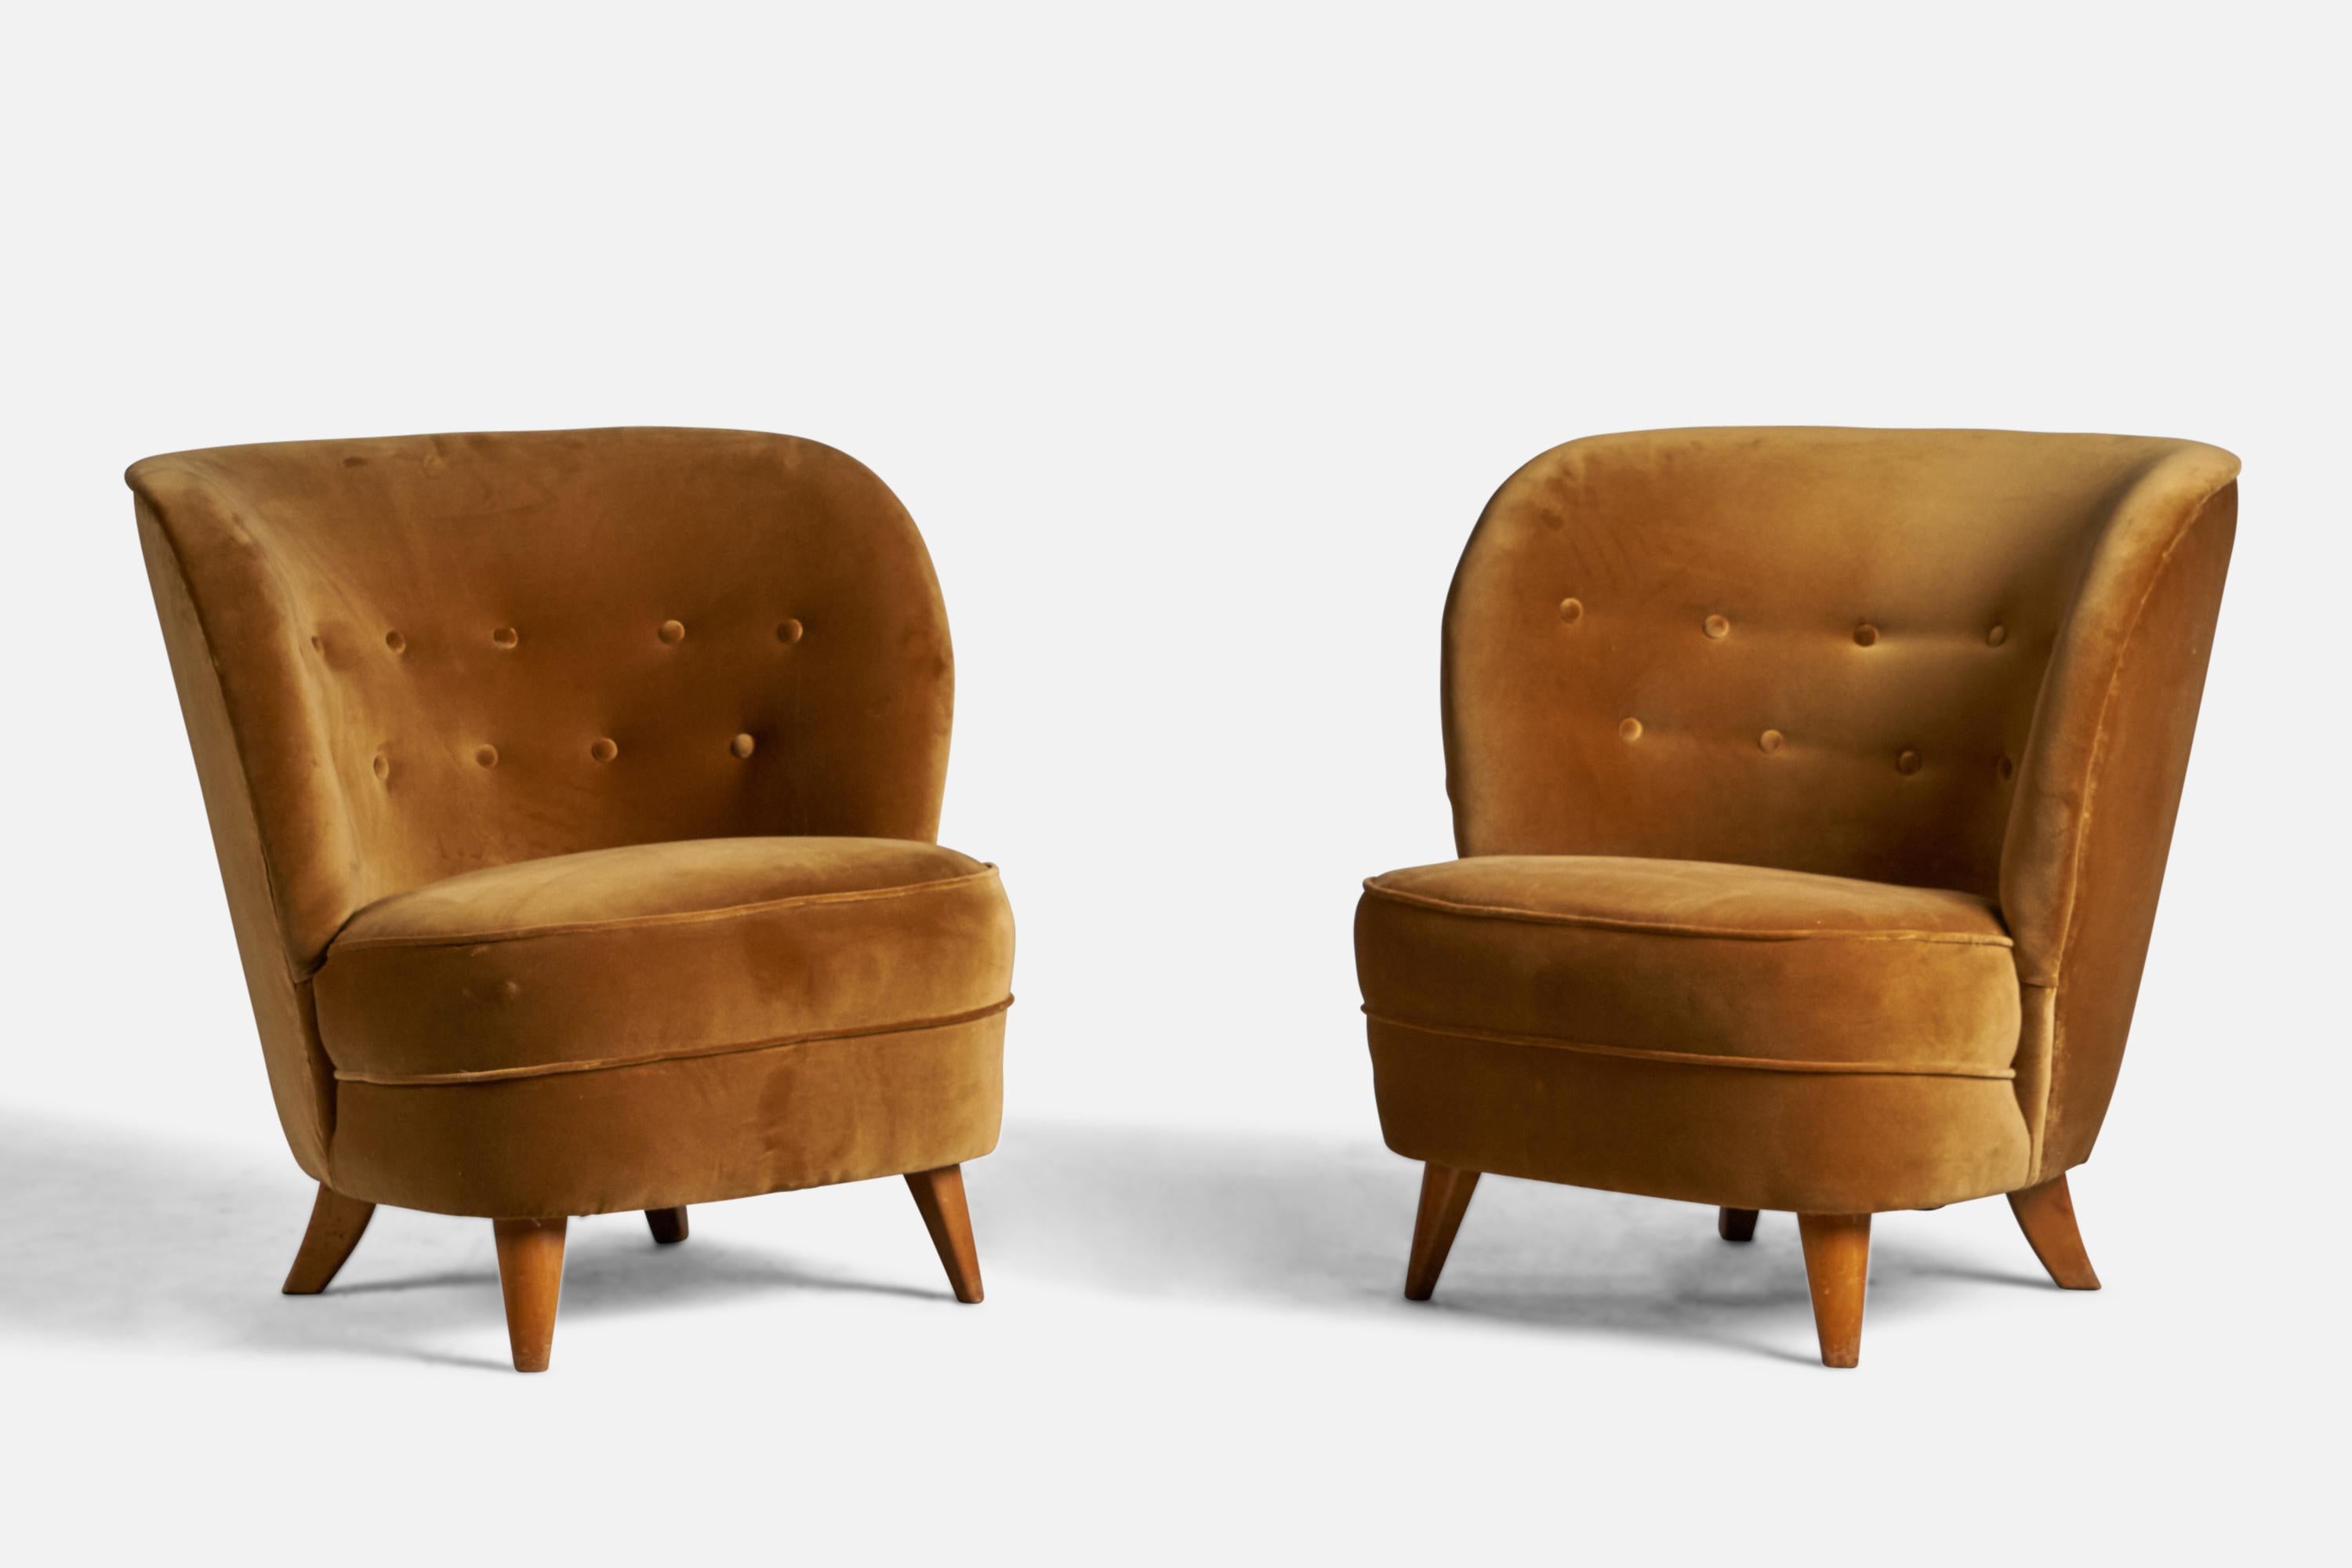 A pair of beige velvet and wood lounge or slipper chairs designed by Tor Wolfenstein and produced by Ditzingers, Sweden, 1940s.

Previously sold same model pairs carrying manufacturers metal plaque.

15.5” seat height

